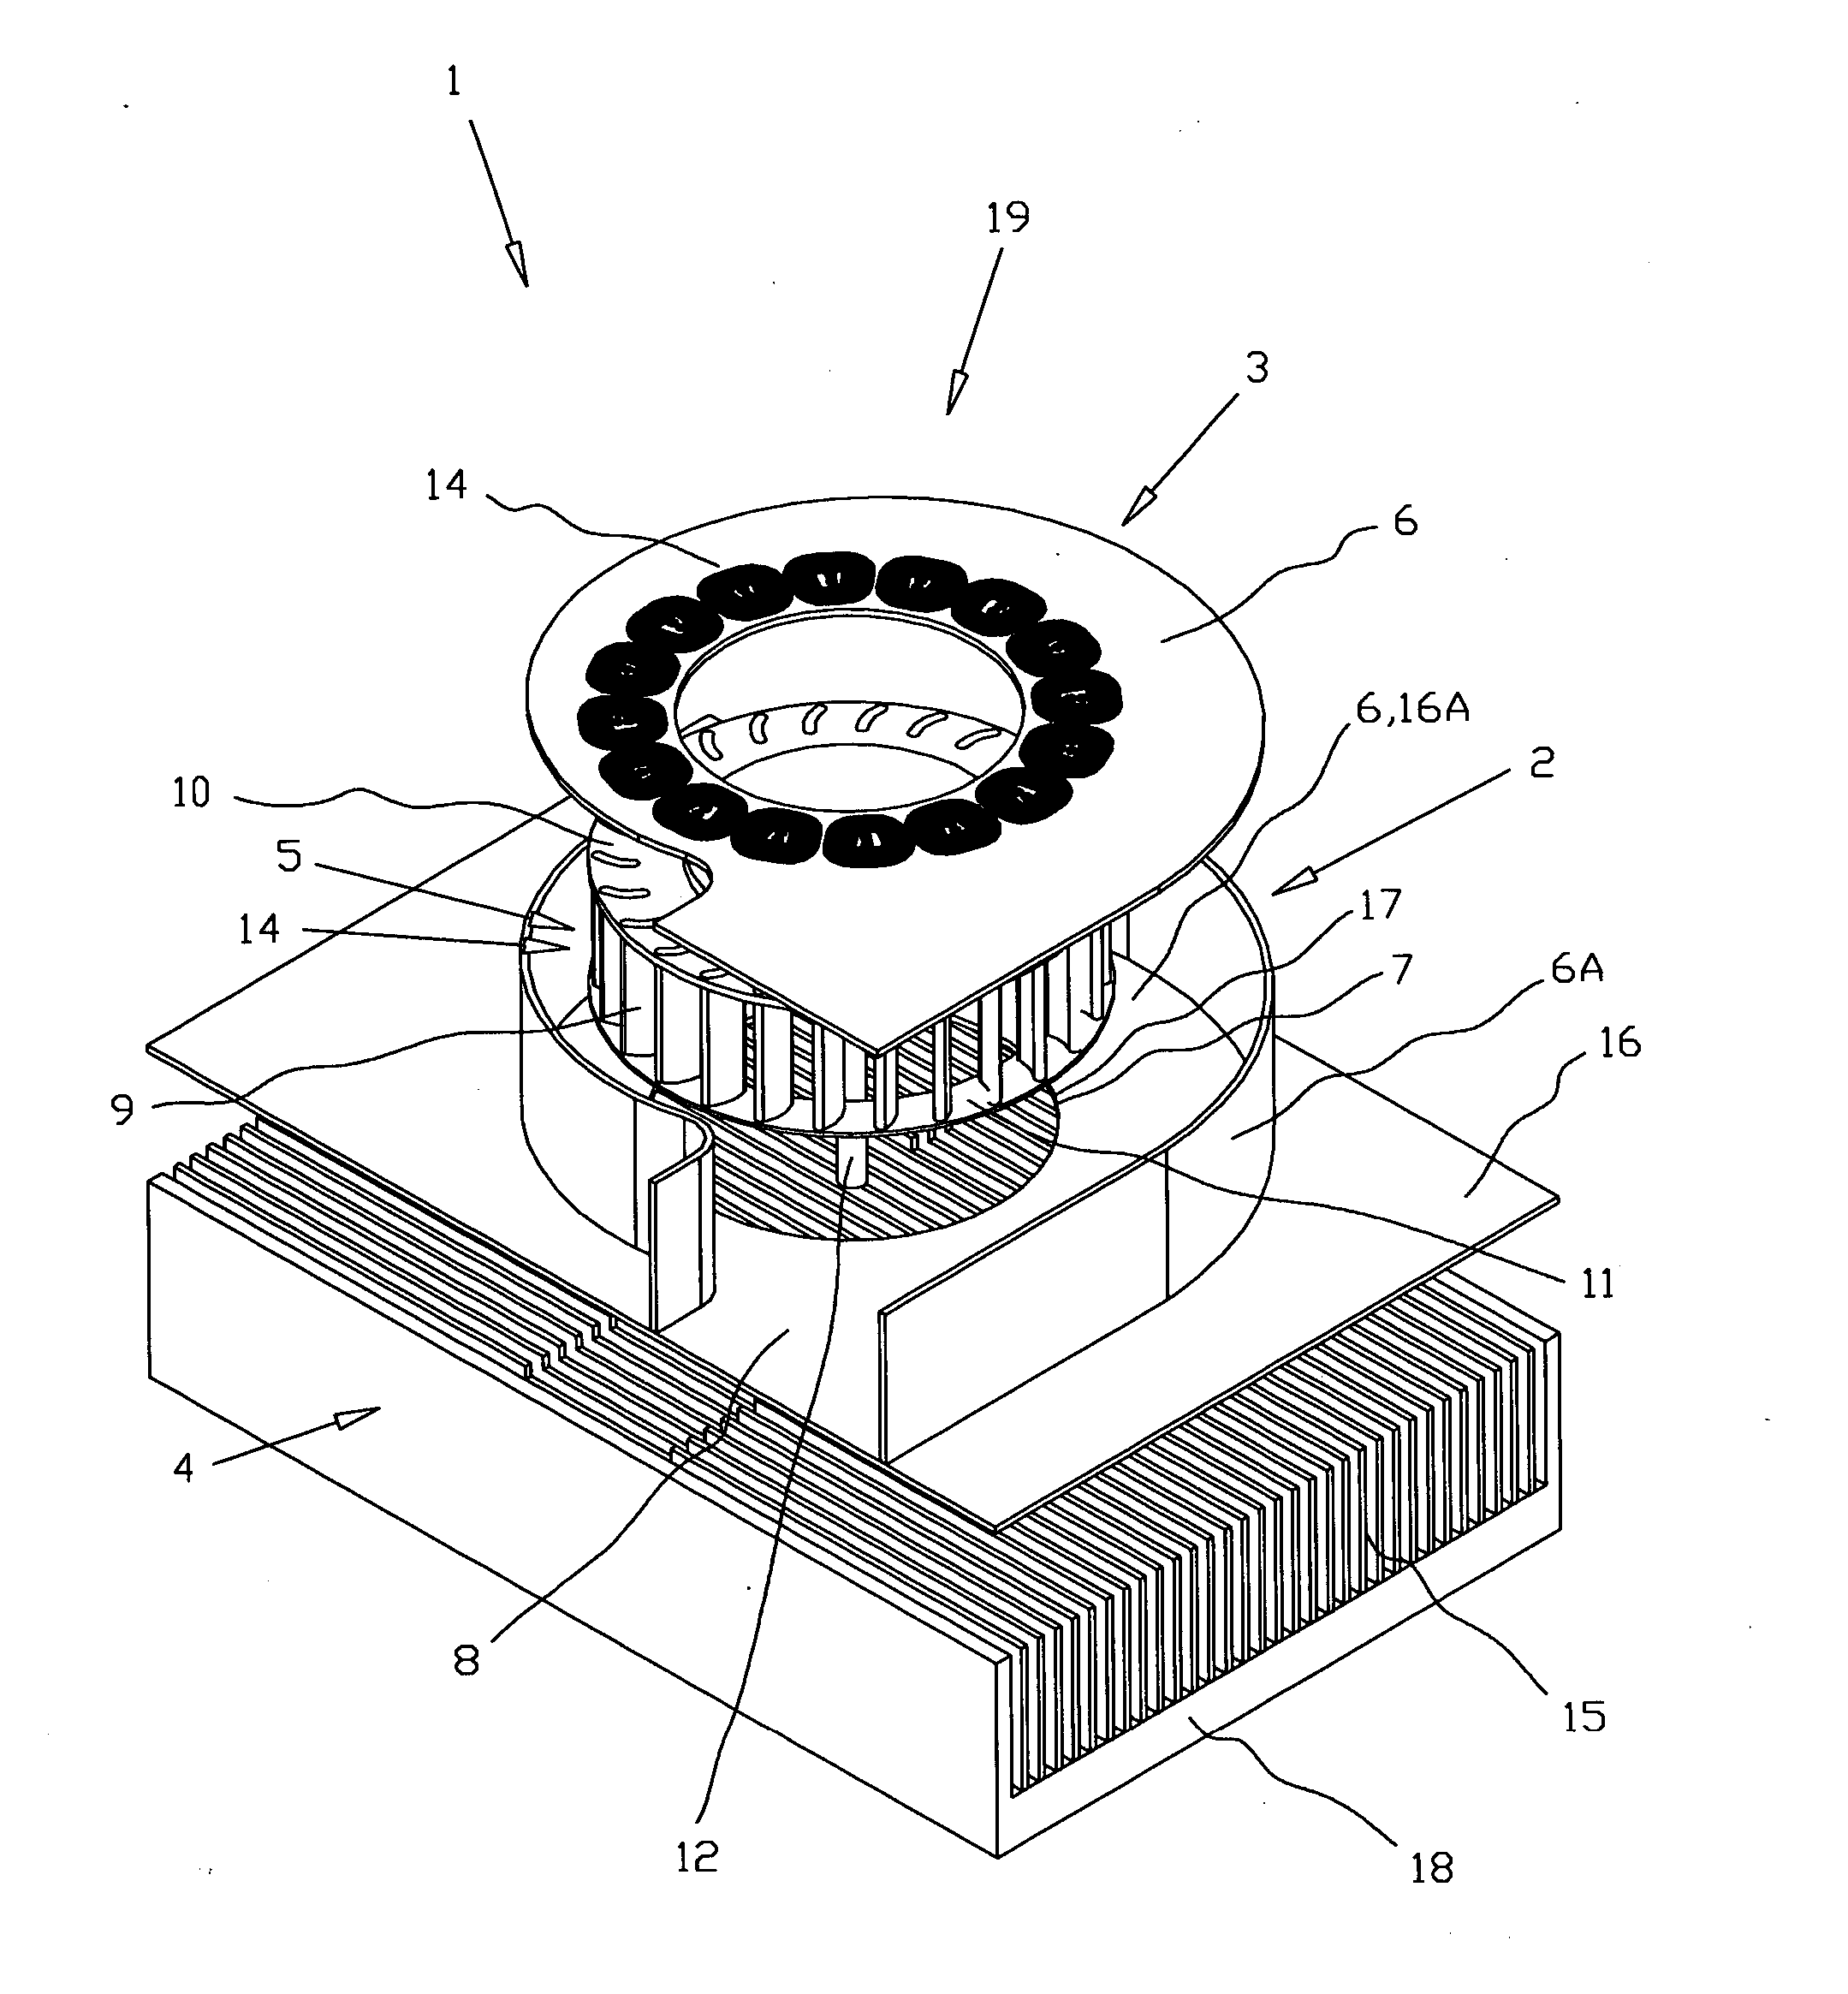 Integrated blade cooler for electronic components